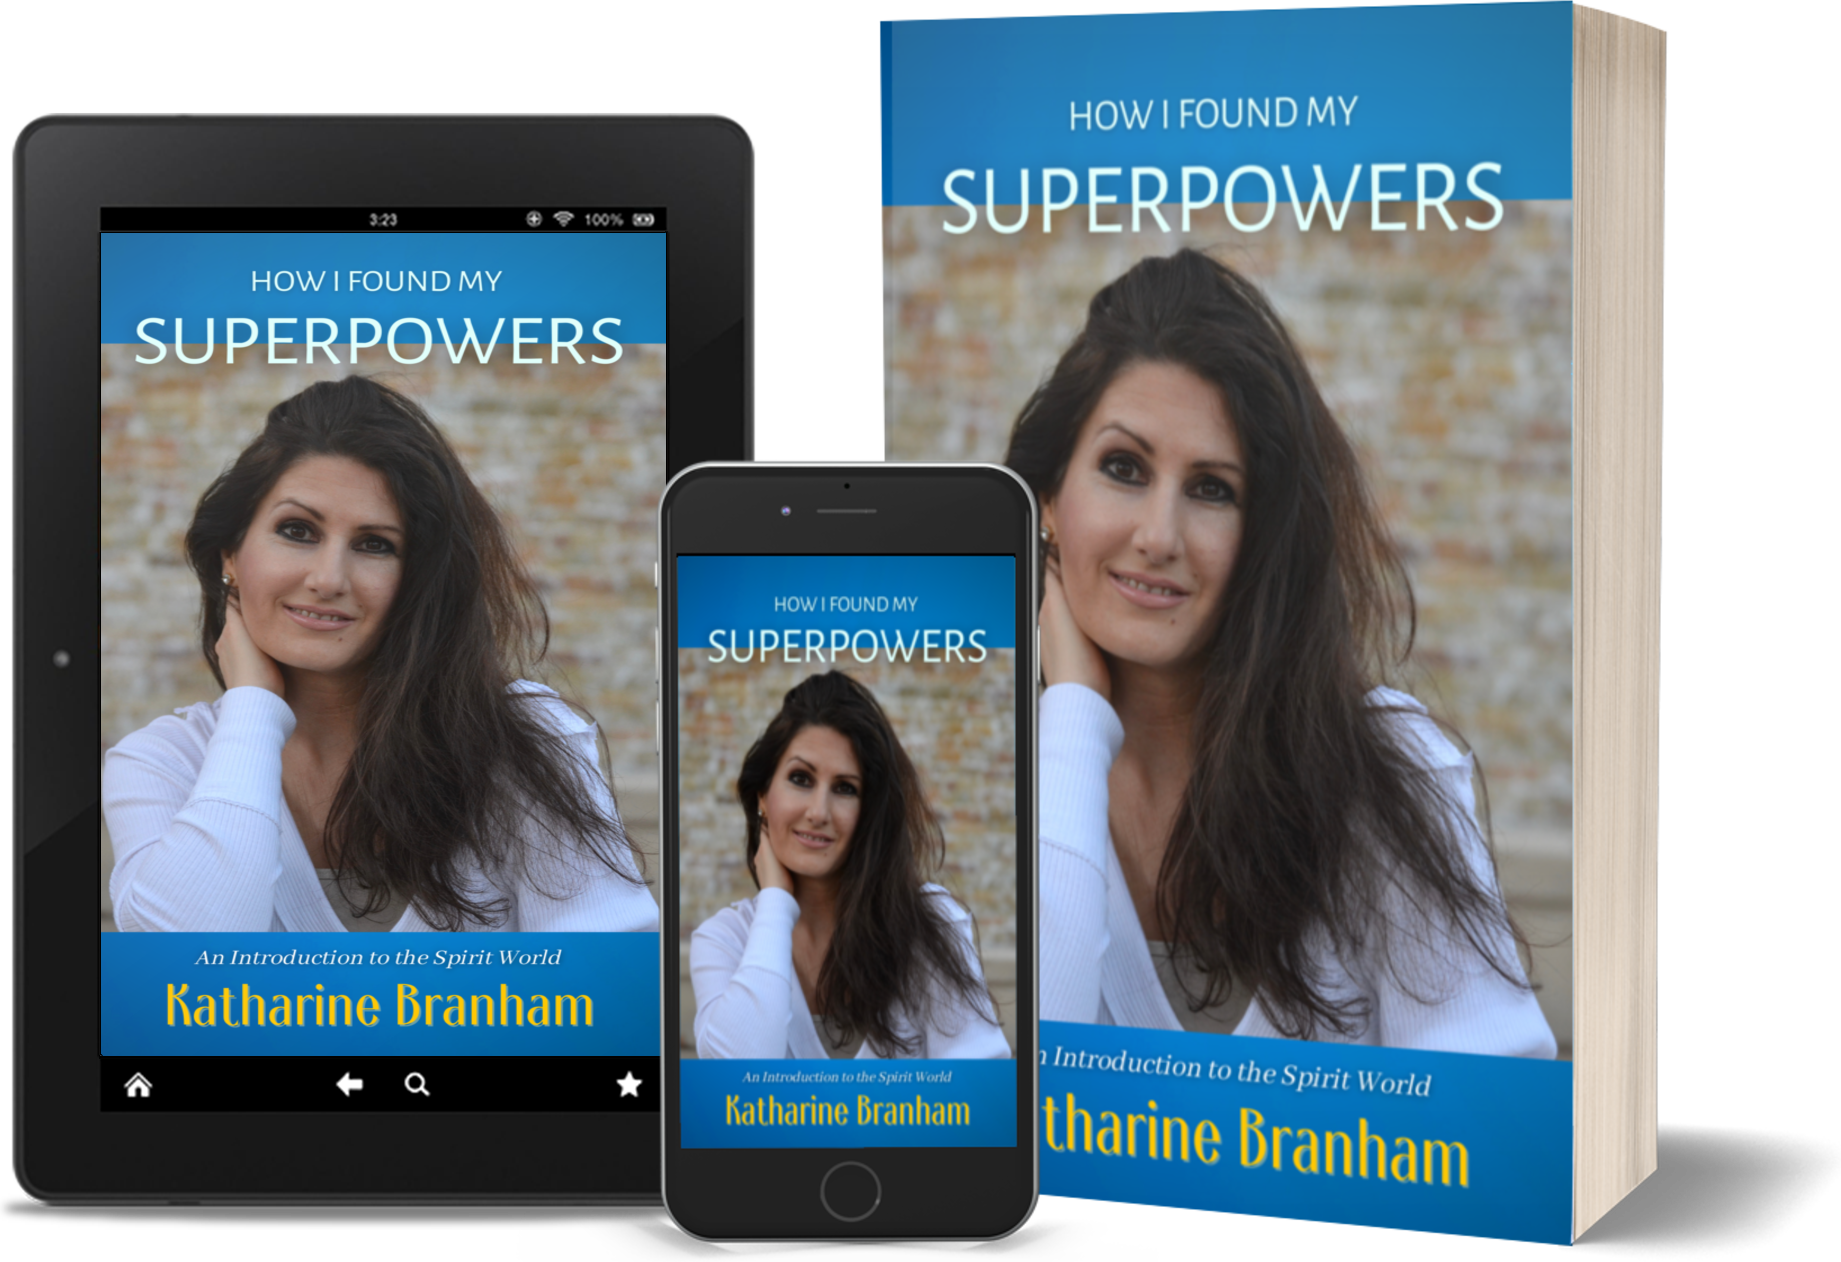 New memoir "How I Found My Superpowers" by Katharine Branham is released, an inspiring, twisting account of spiritual awakening and harnessing divine abilities 